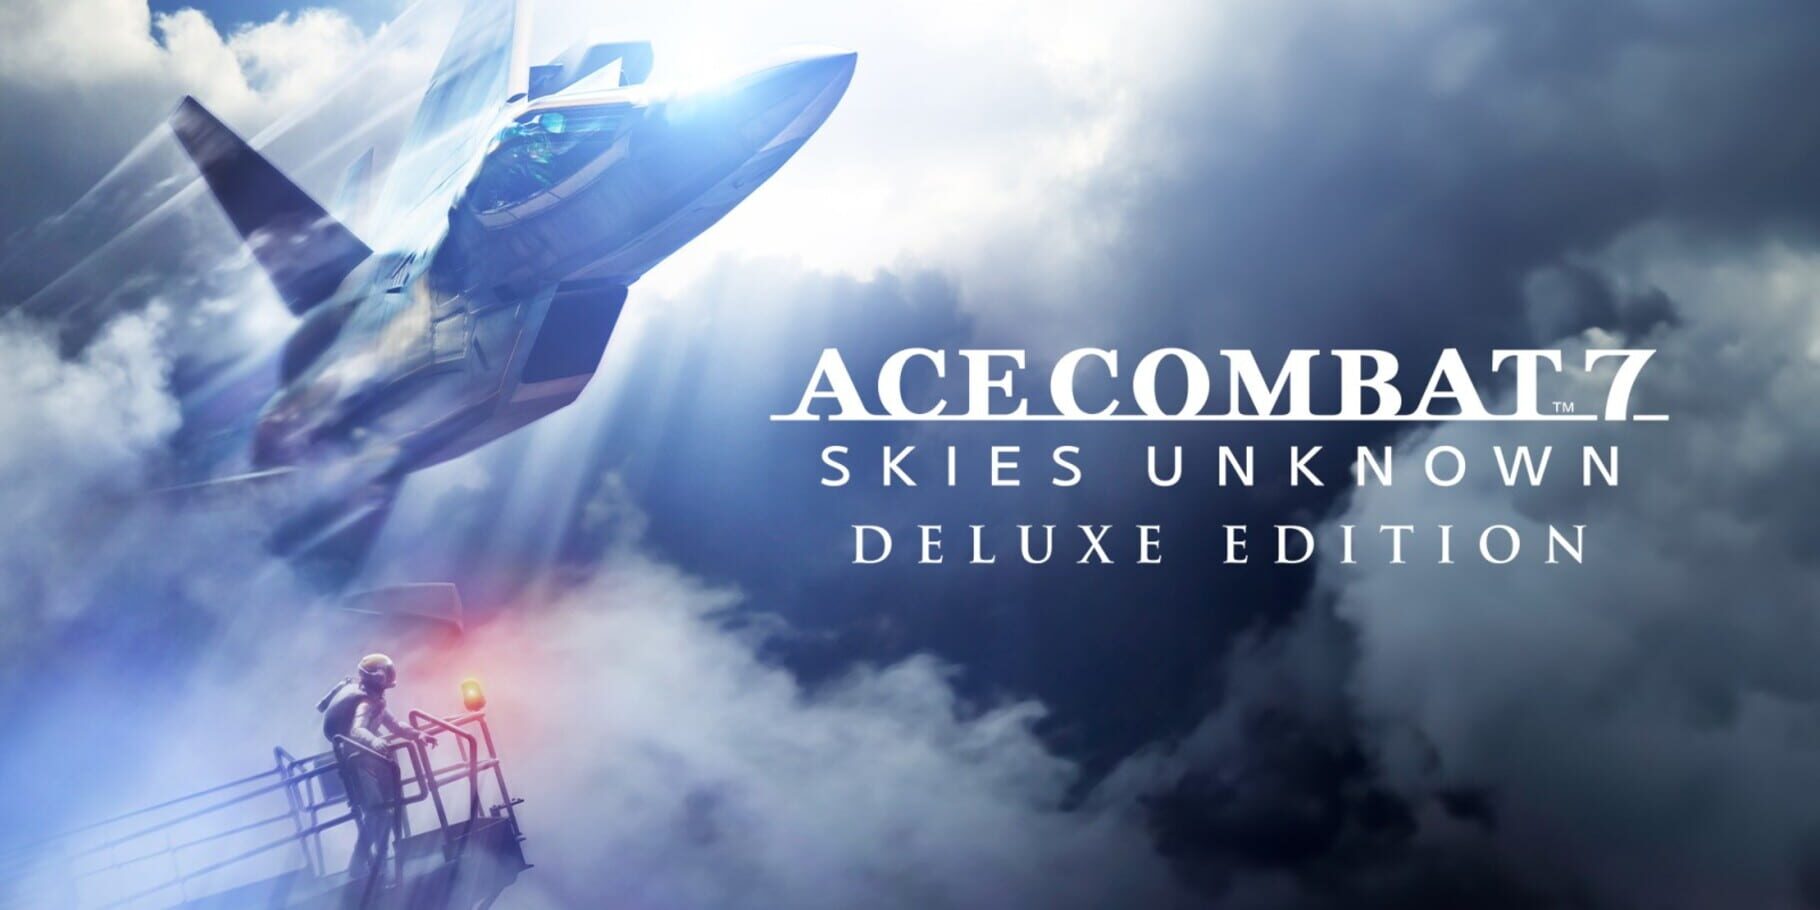 Ace Combat 7: Skies Unknown Deluxe Edition artwork